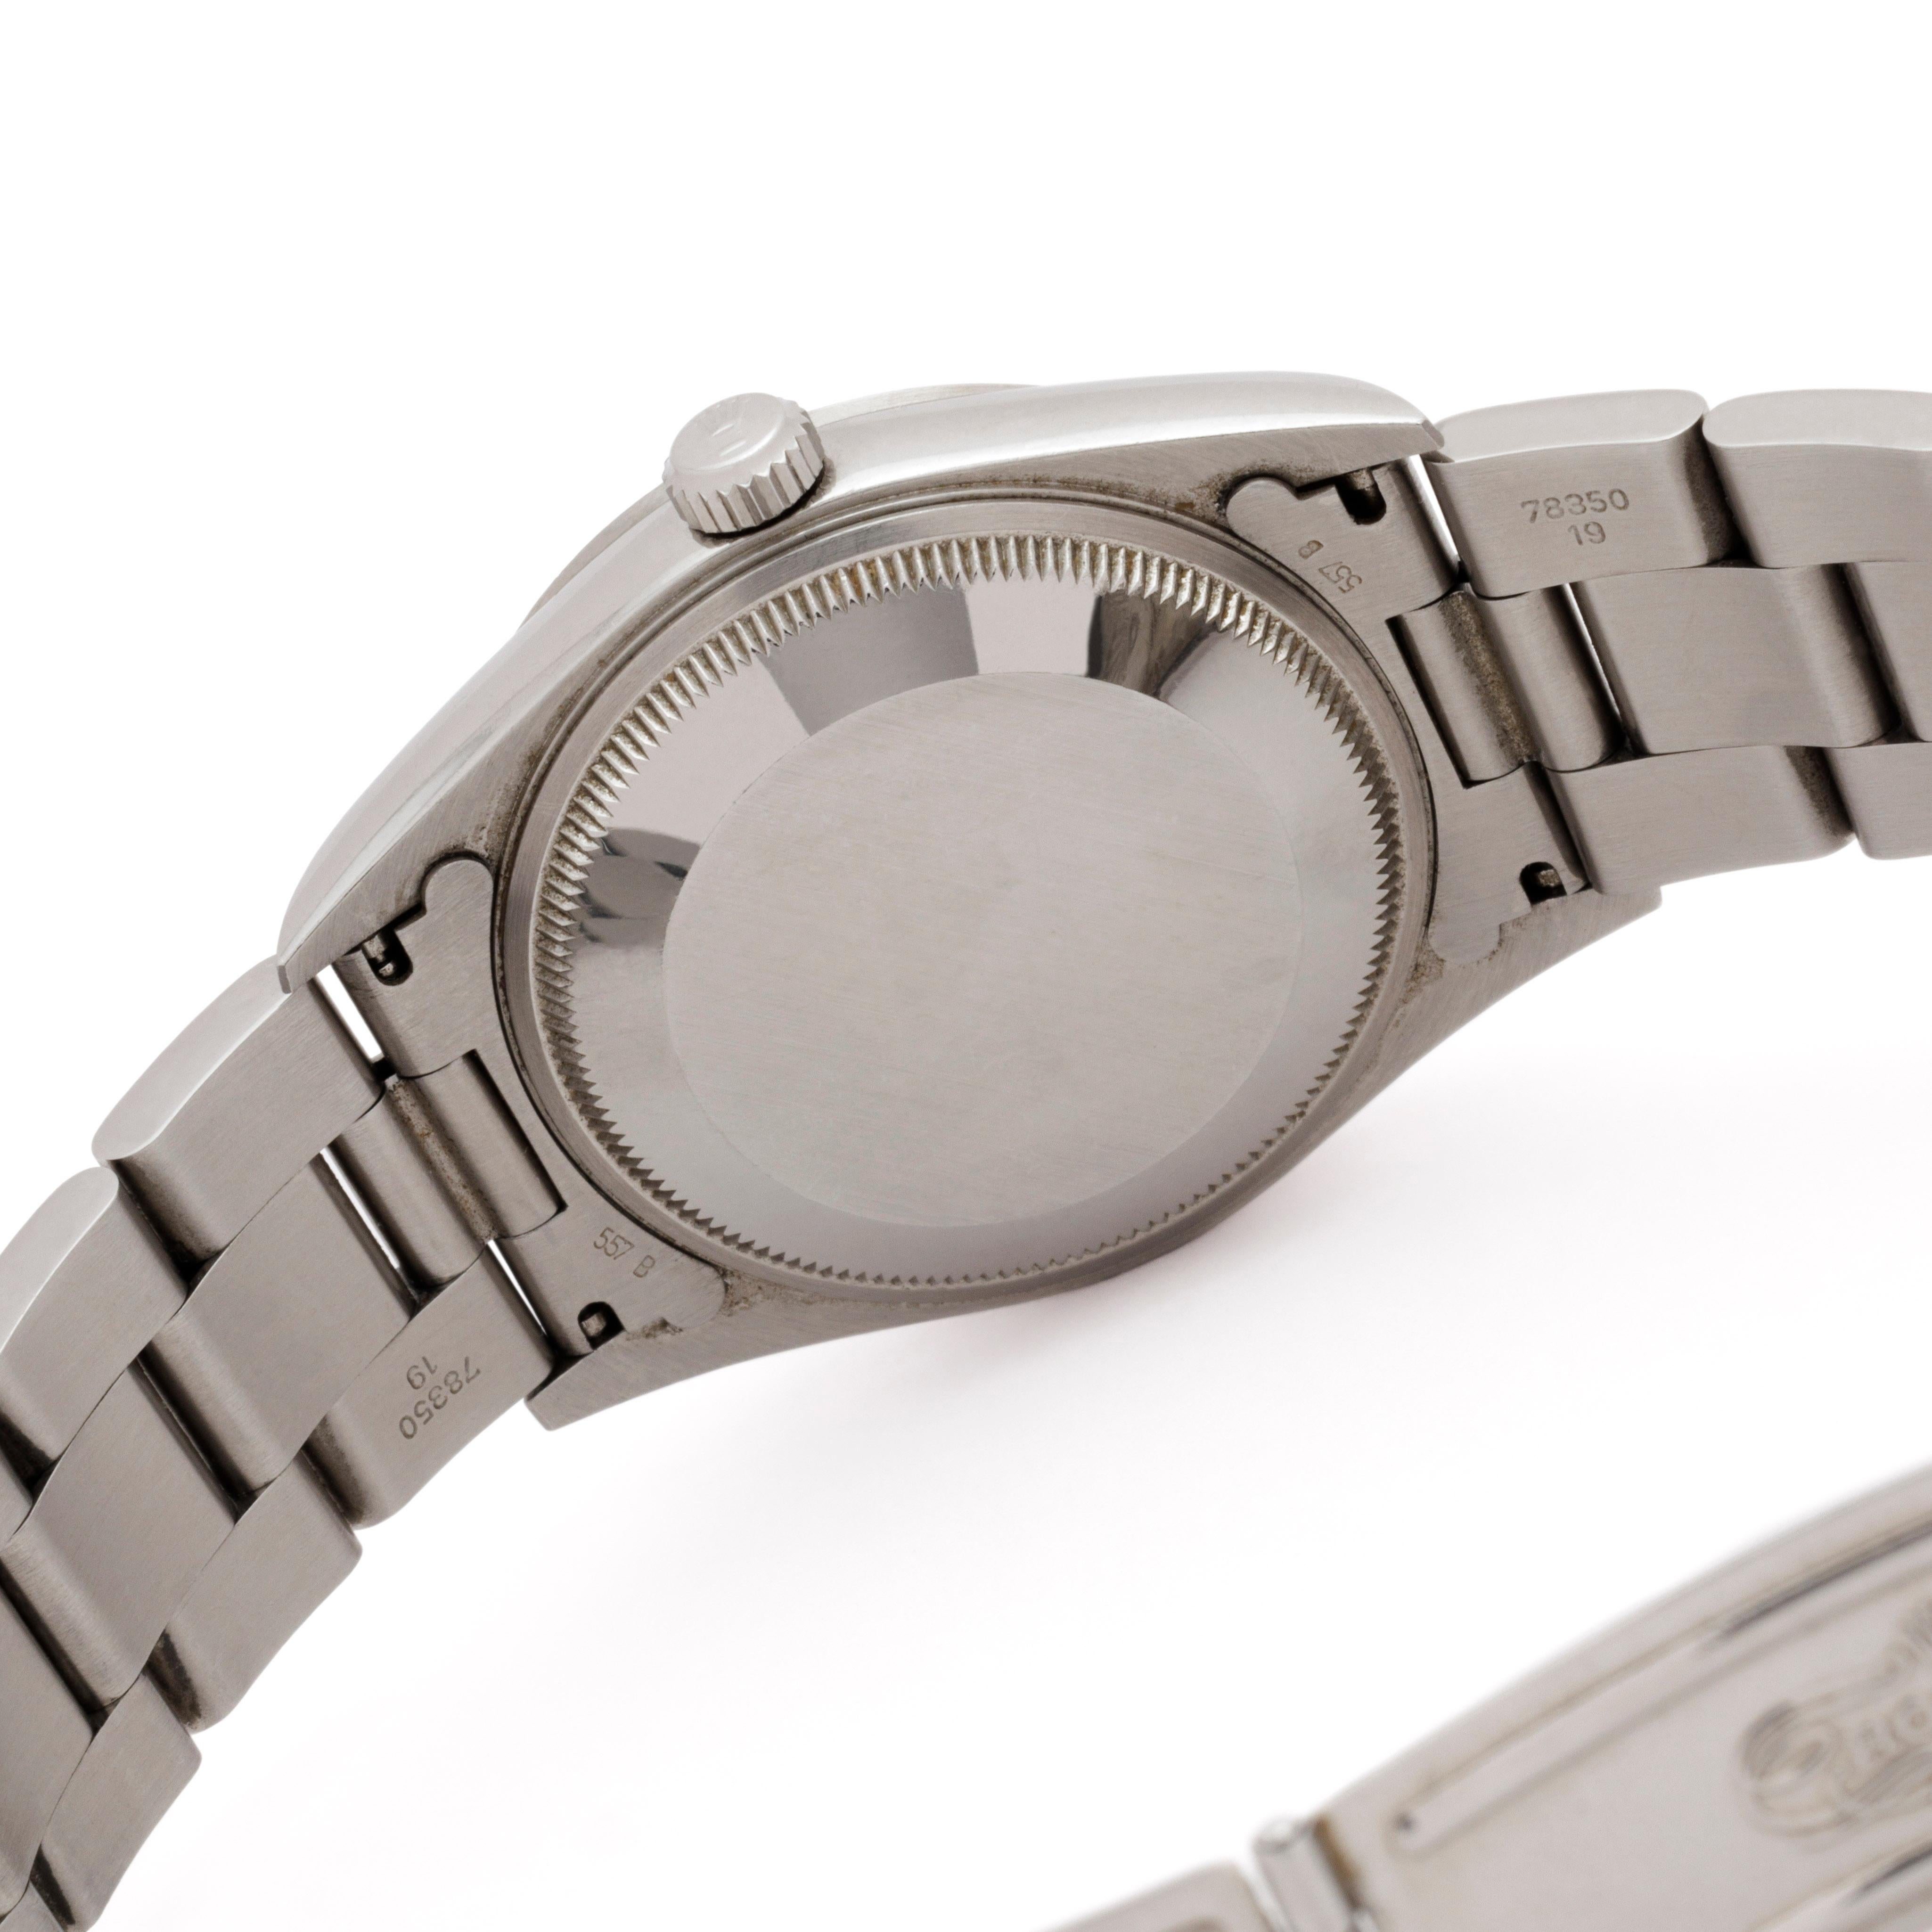 1995 Rolex Date Model 15200 Salmon Dial In Excellent Condition For Sale In New York, NY